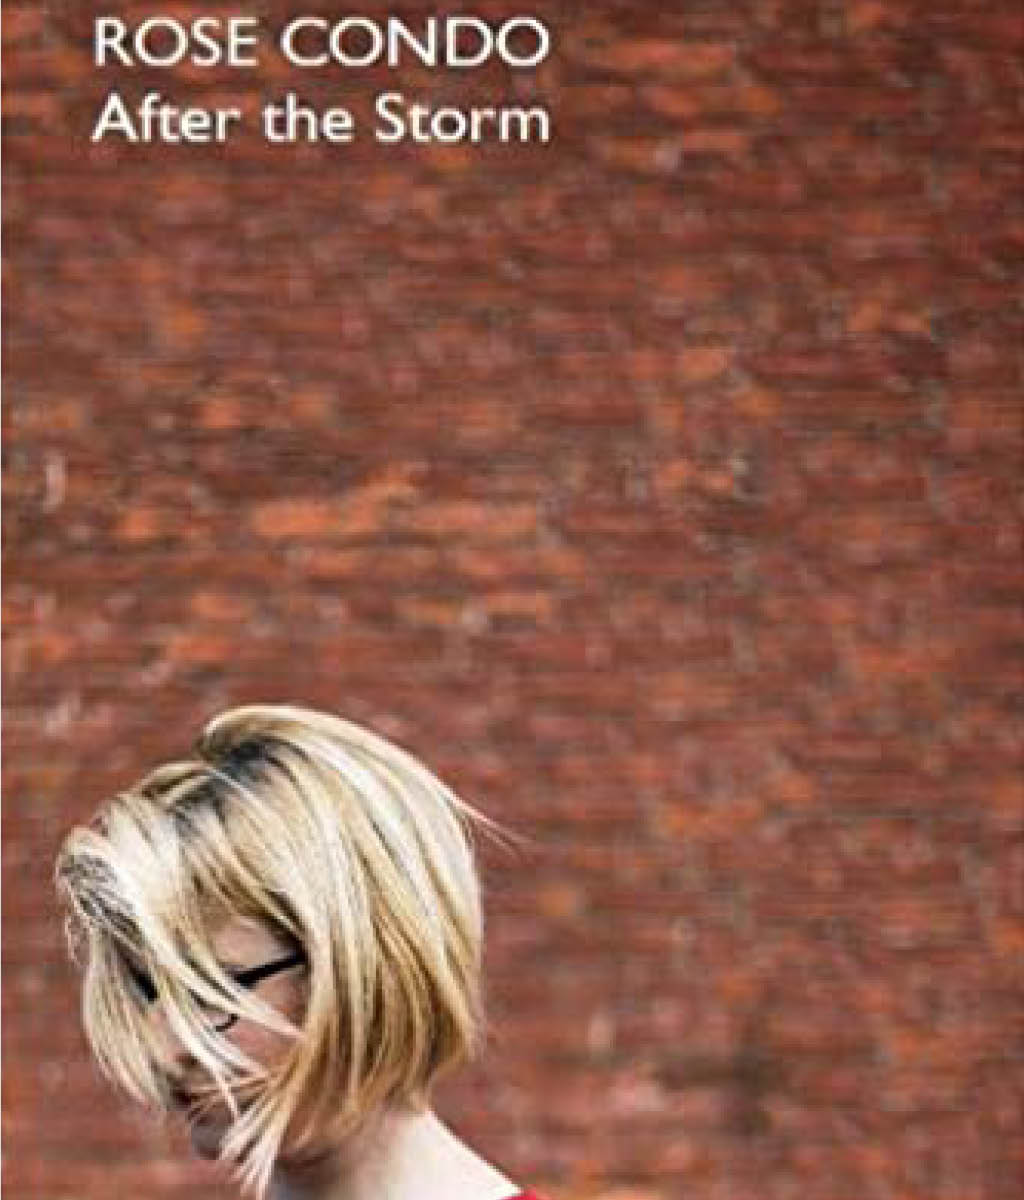 After the Storm by Rose Condo